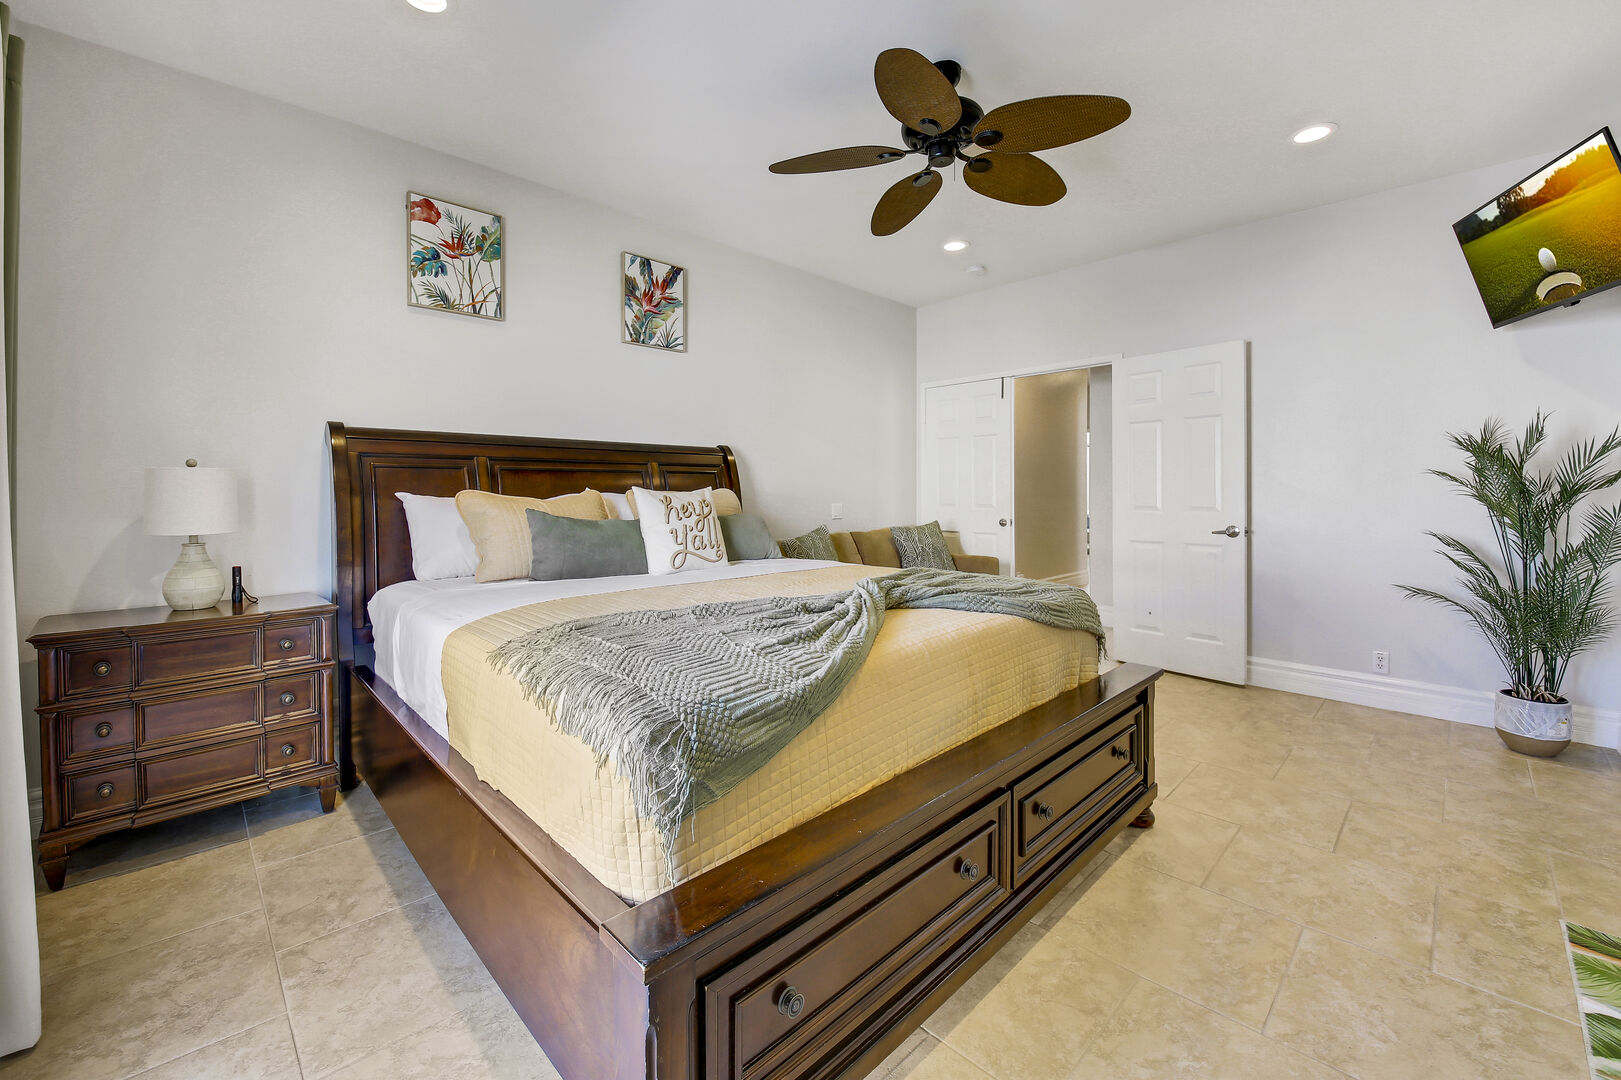 Master Suite 1 is located at the end of the hallway next to bedroom two and features a King-sized Bed, a Full-sized Sofa Sleeper, a 43-inch Insignia Smart television, a remote-controlled ceiling fan, and a walk-in closet.